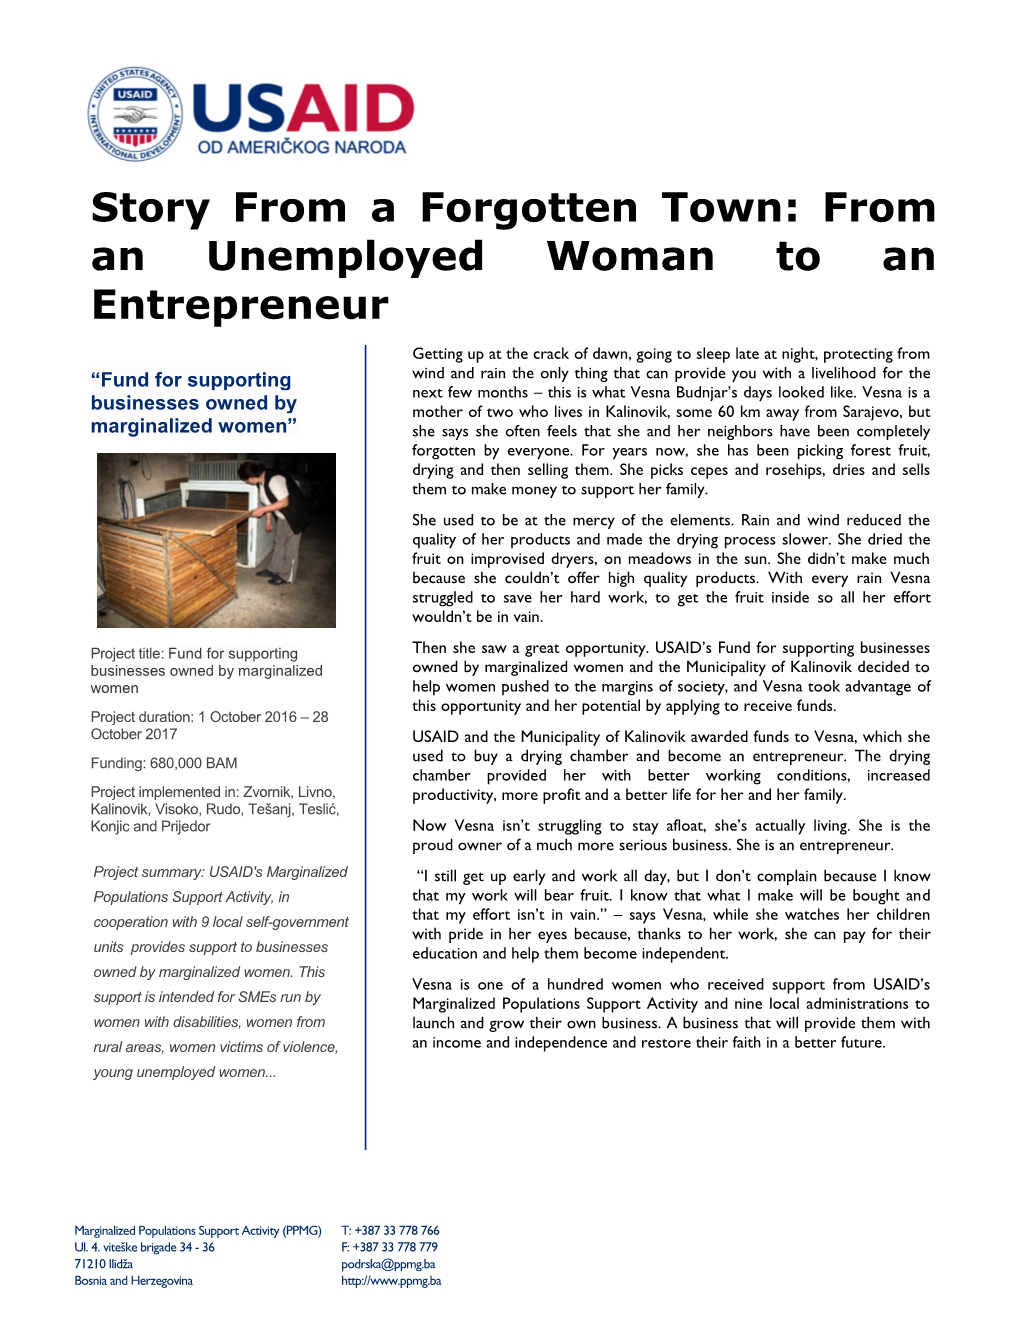 Story from a Forgotten Town: from an Unemployed Woman to an Entrepreneur